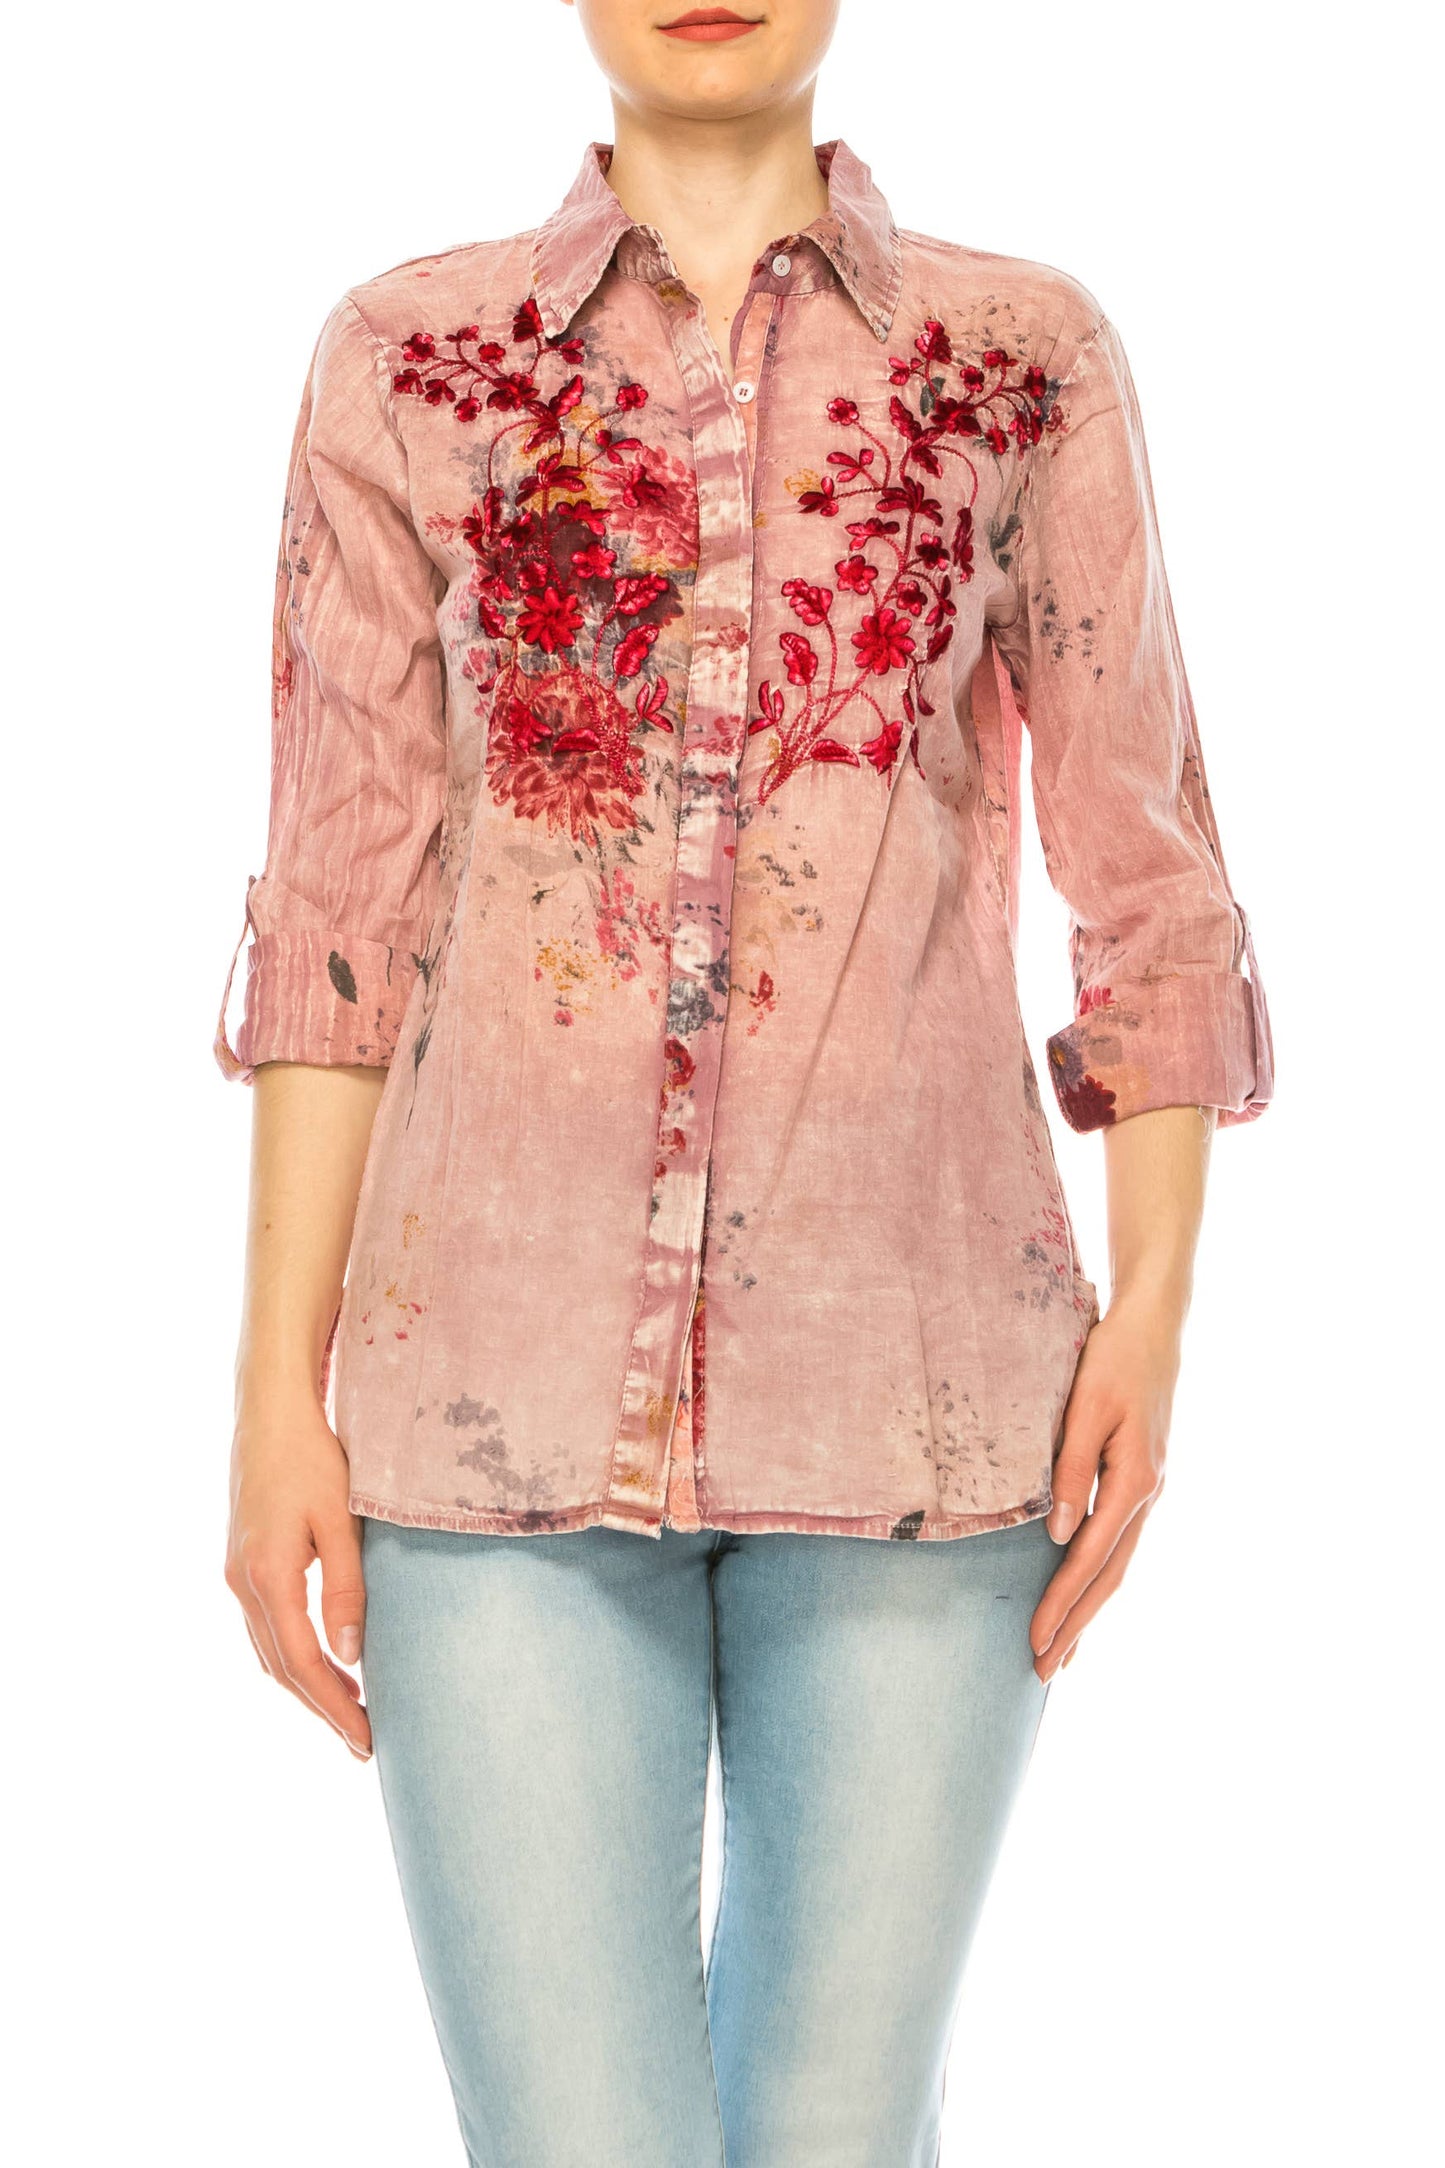 Vintage Pink Floral Printed Shirt with Embroidery